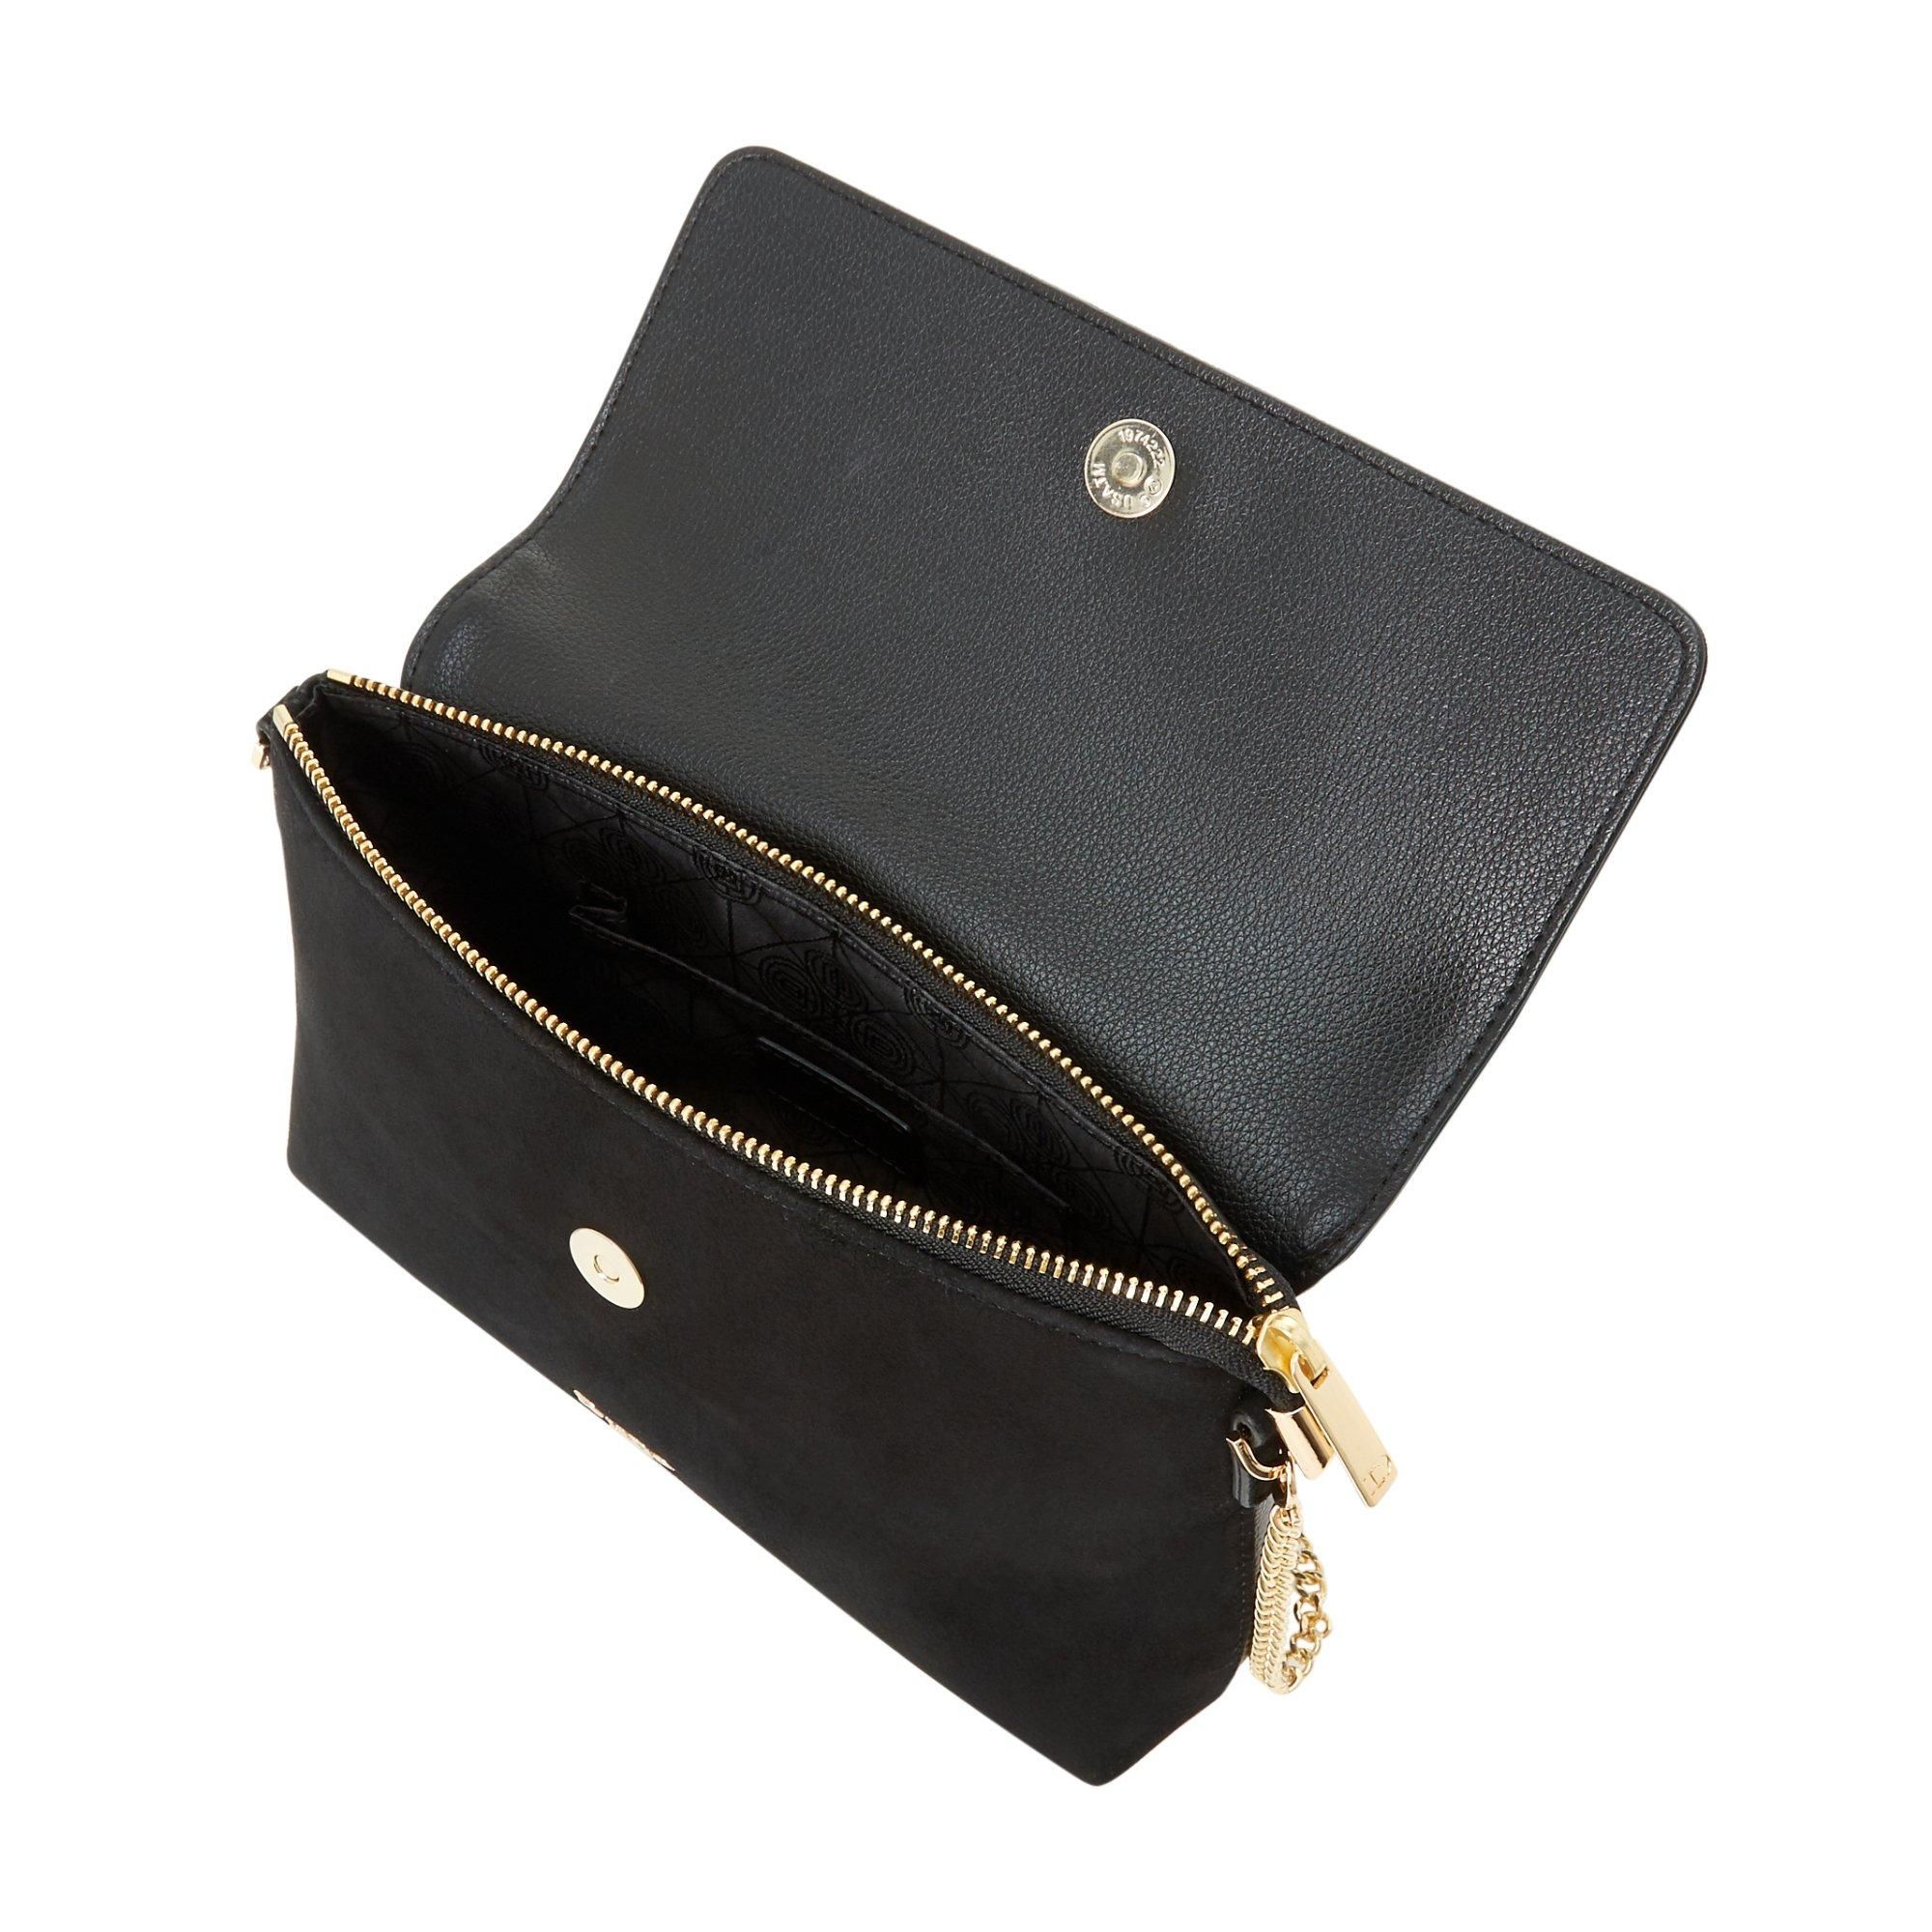 Add a stylish finishing touch to your accessories line-up with this clutch. Simple yet chic, its minimalist design is offset with a metal chain strap. The spacious interior is ideal for carrying your day-to-evening essentials.